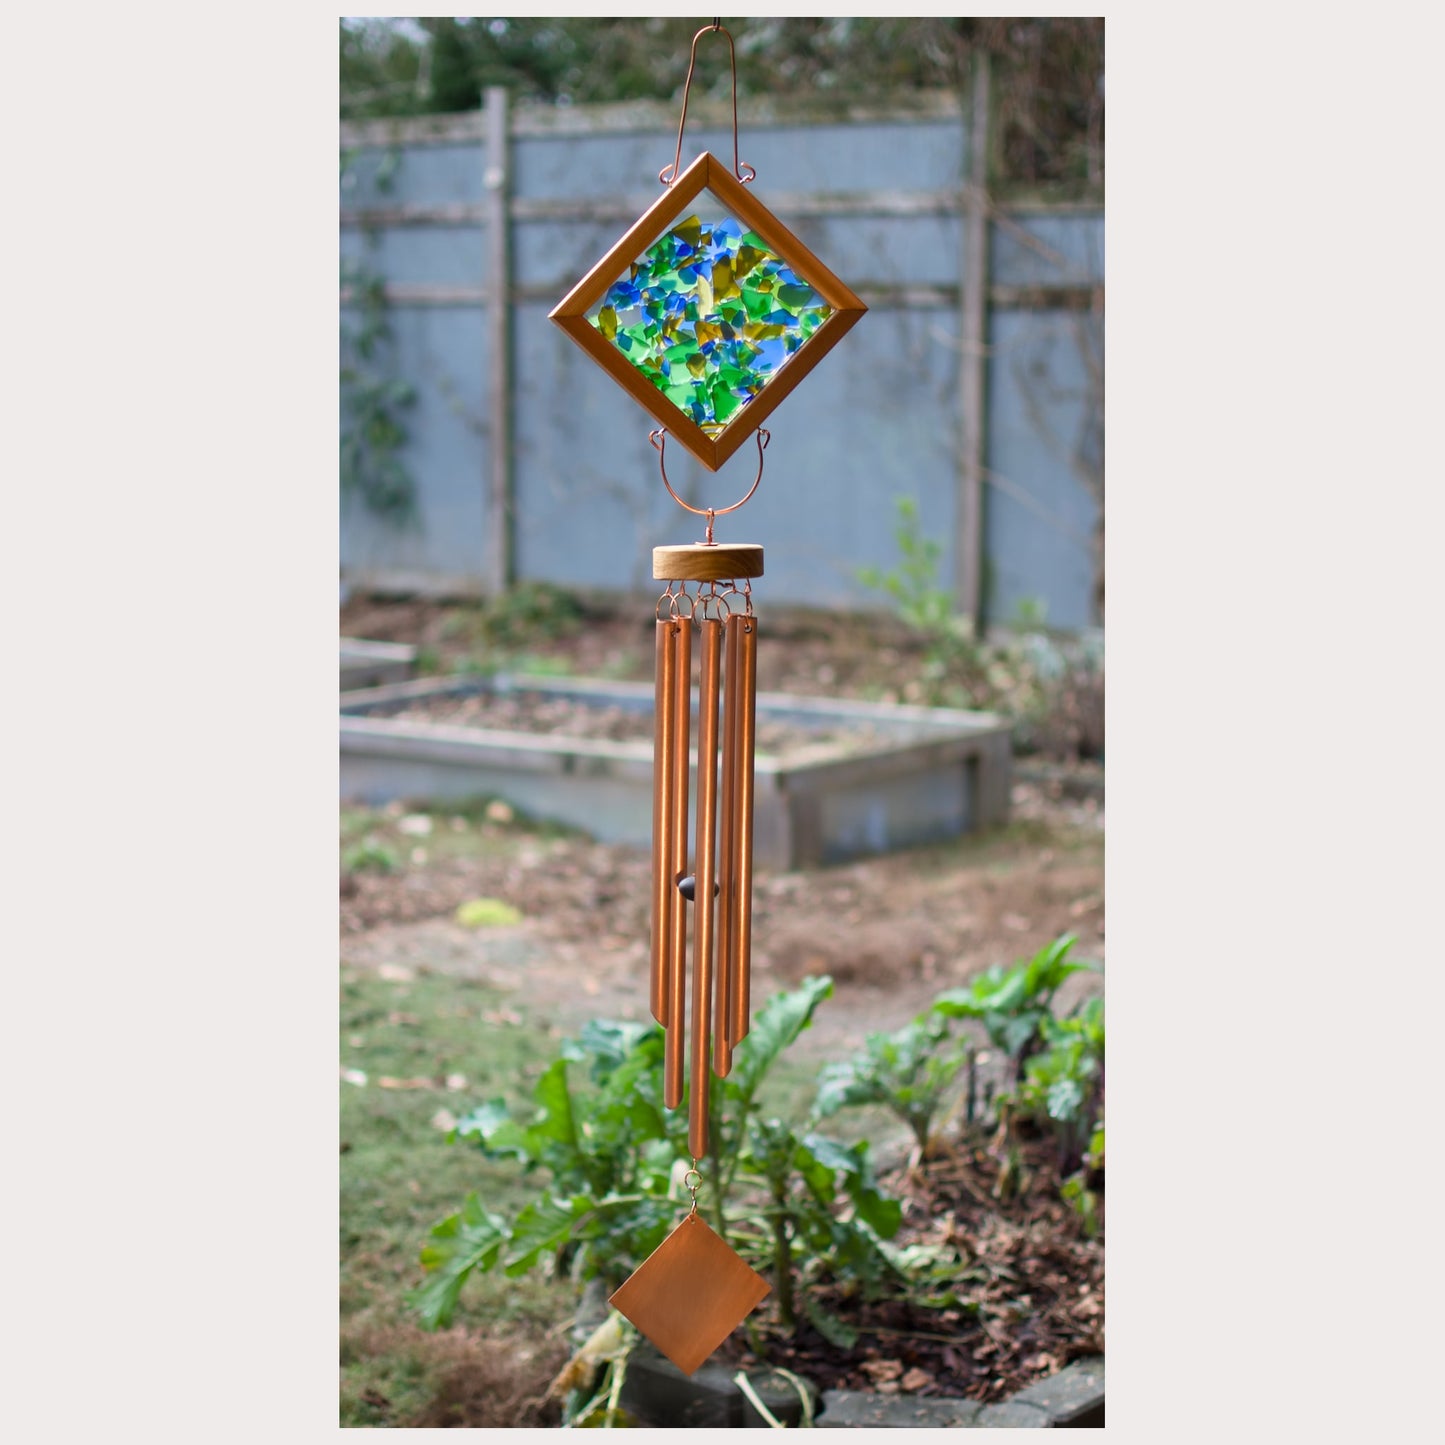 Handcrafted sea glass kaleidoscope wind chime with real copper chimes.